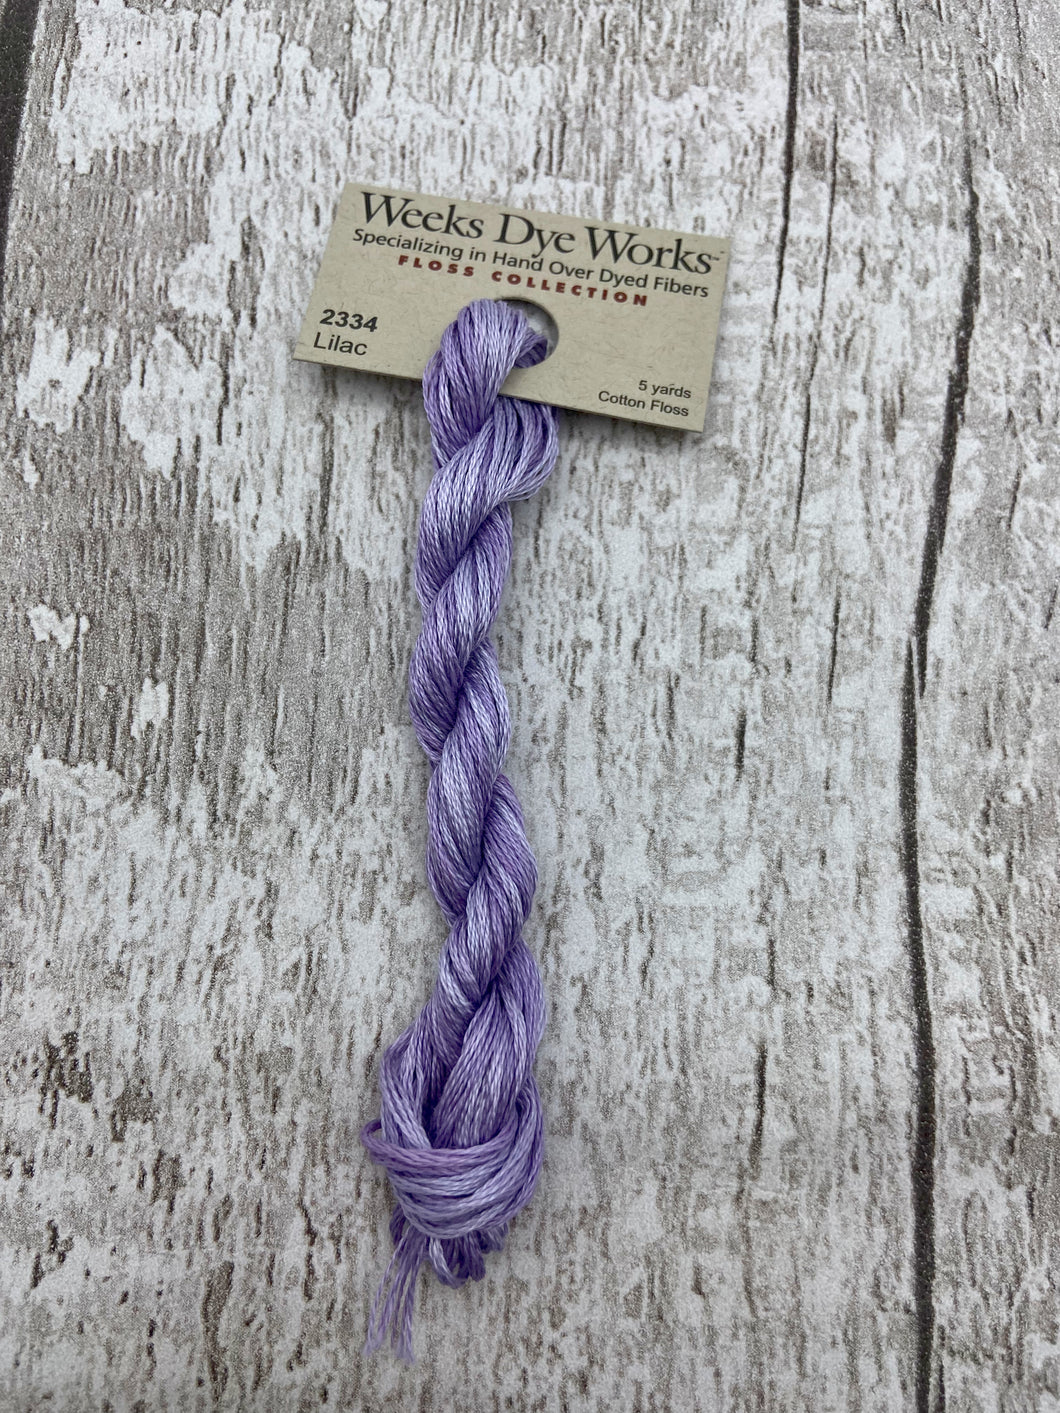 Lilac (#2334) Weeks Dye Works, 6-strand cotton floss